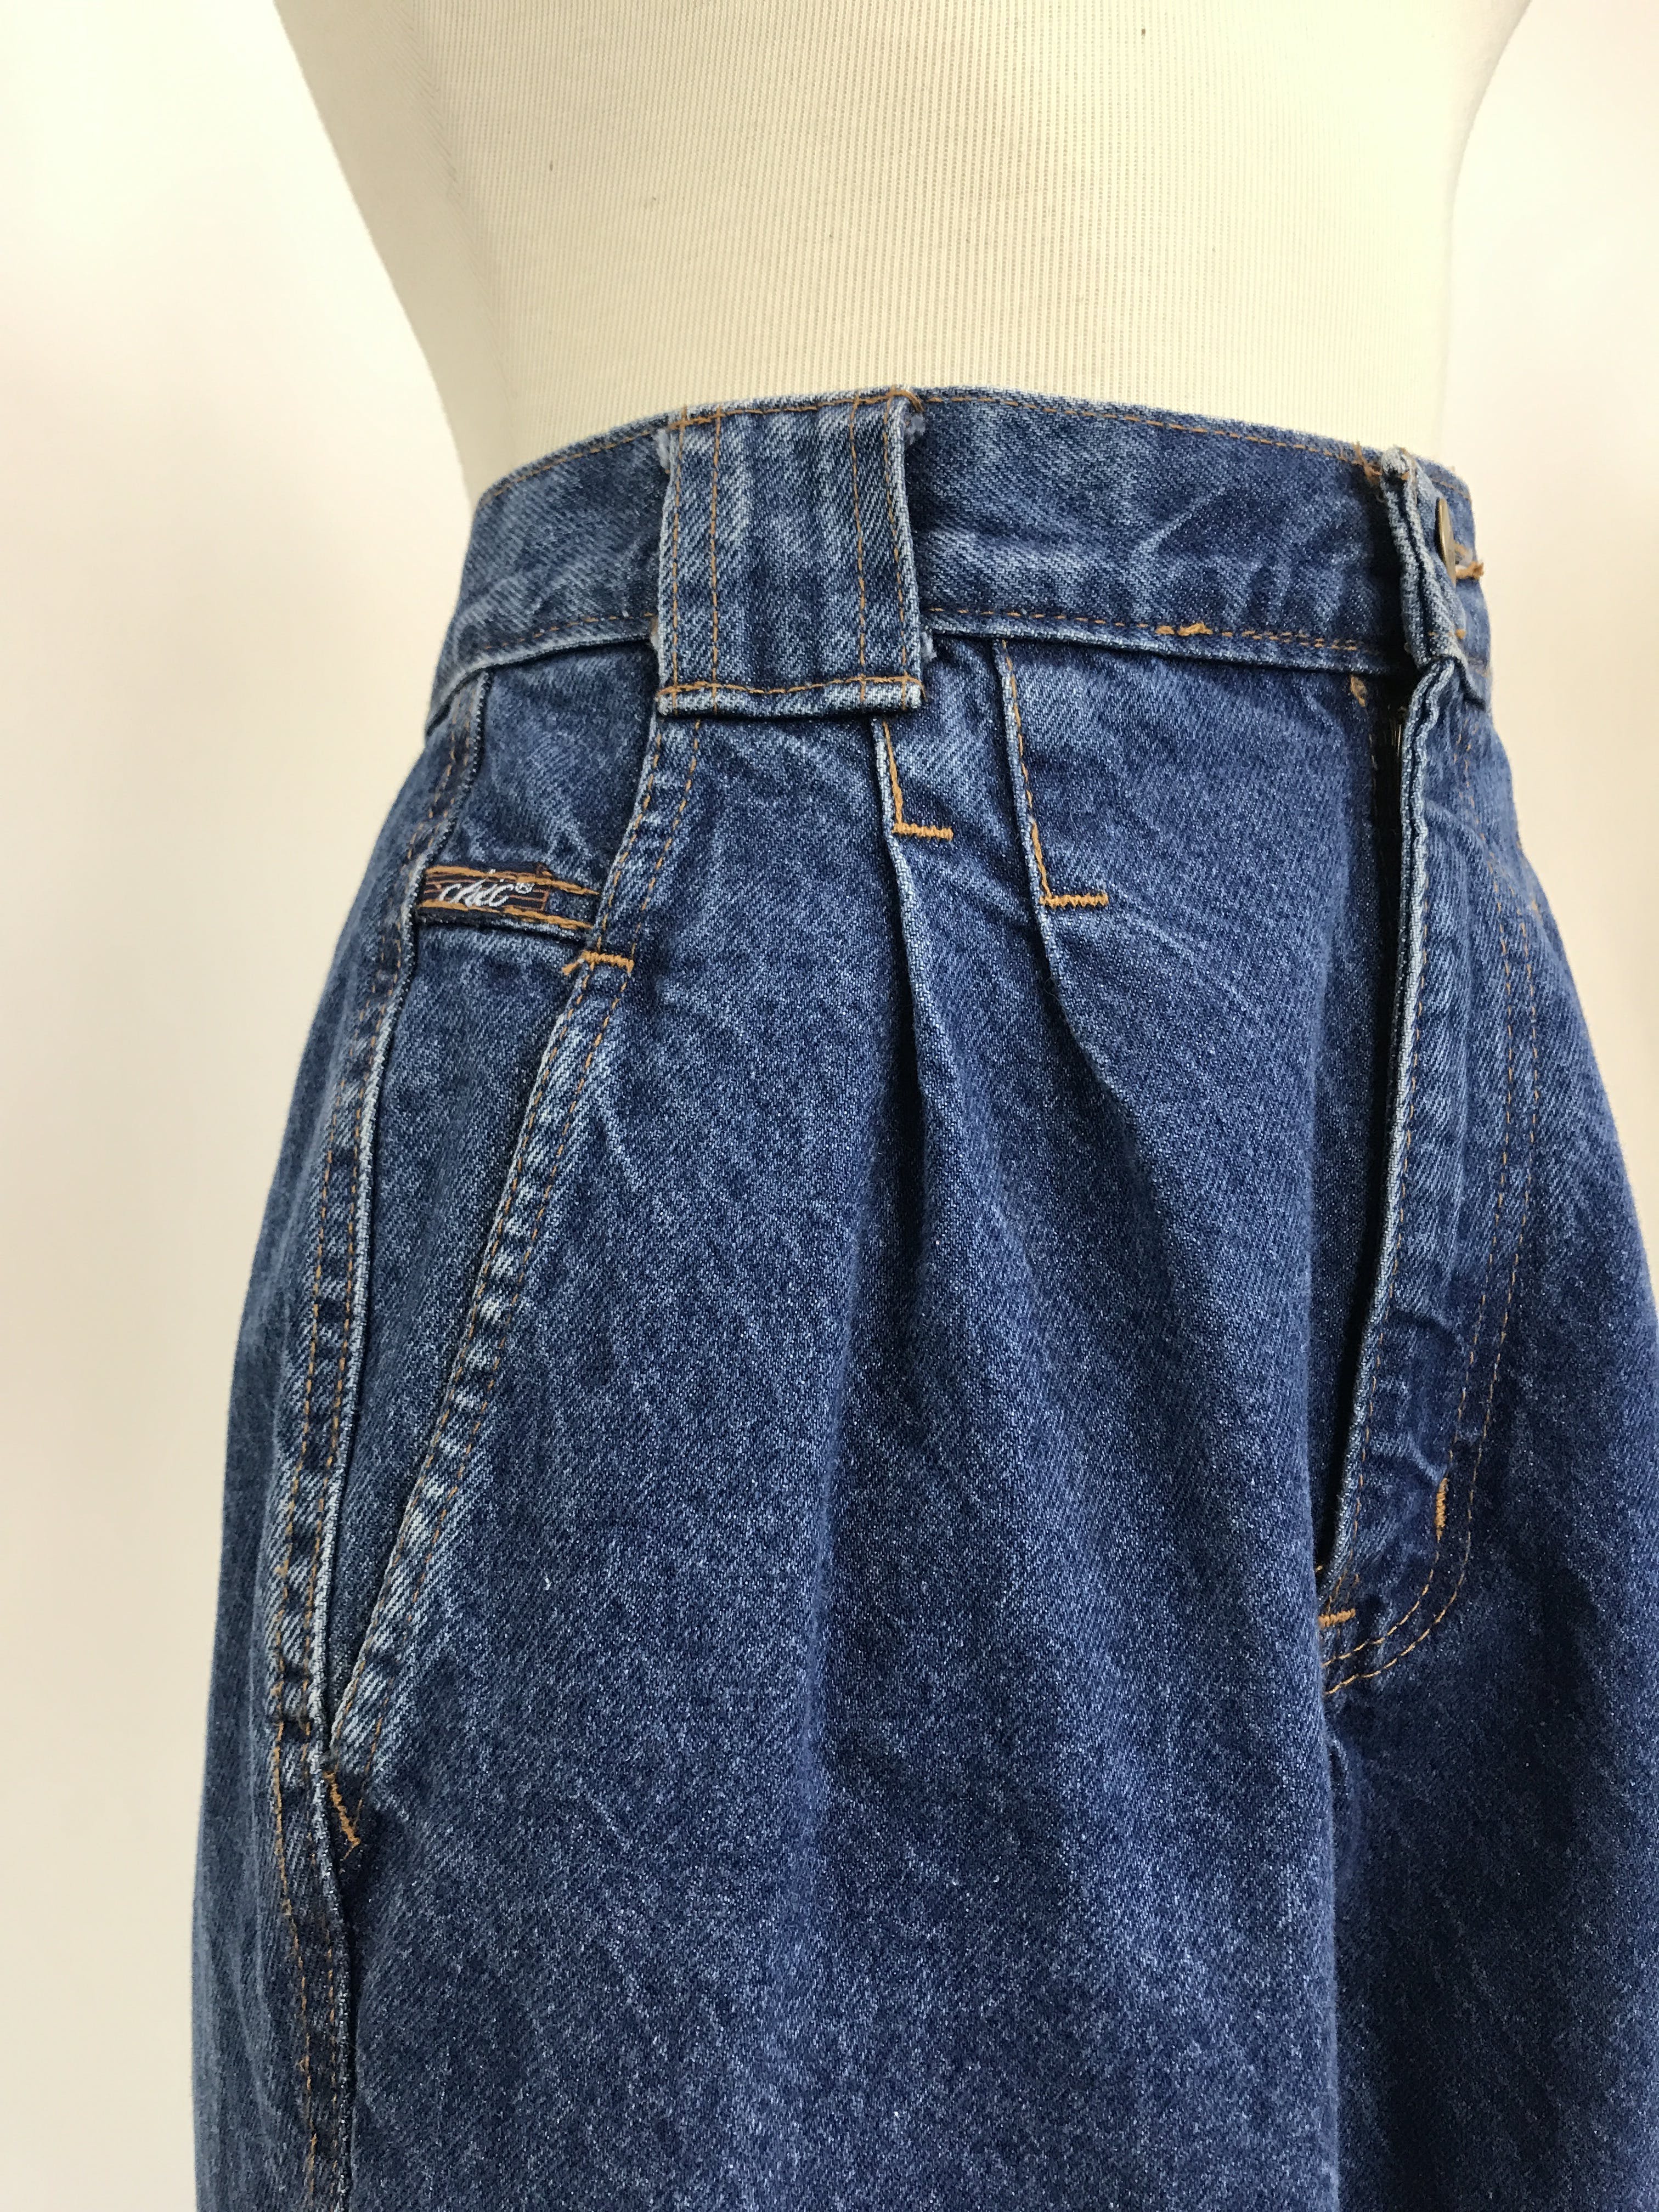 Vintage 80's High Waisted Blue Jeans by Chic | Shop THRILLING